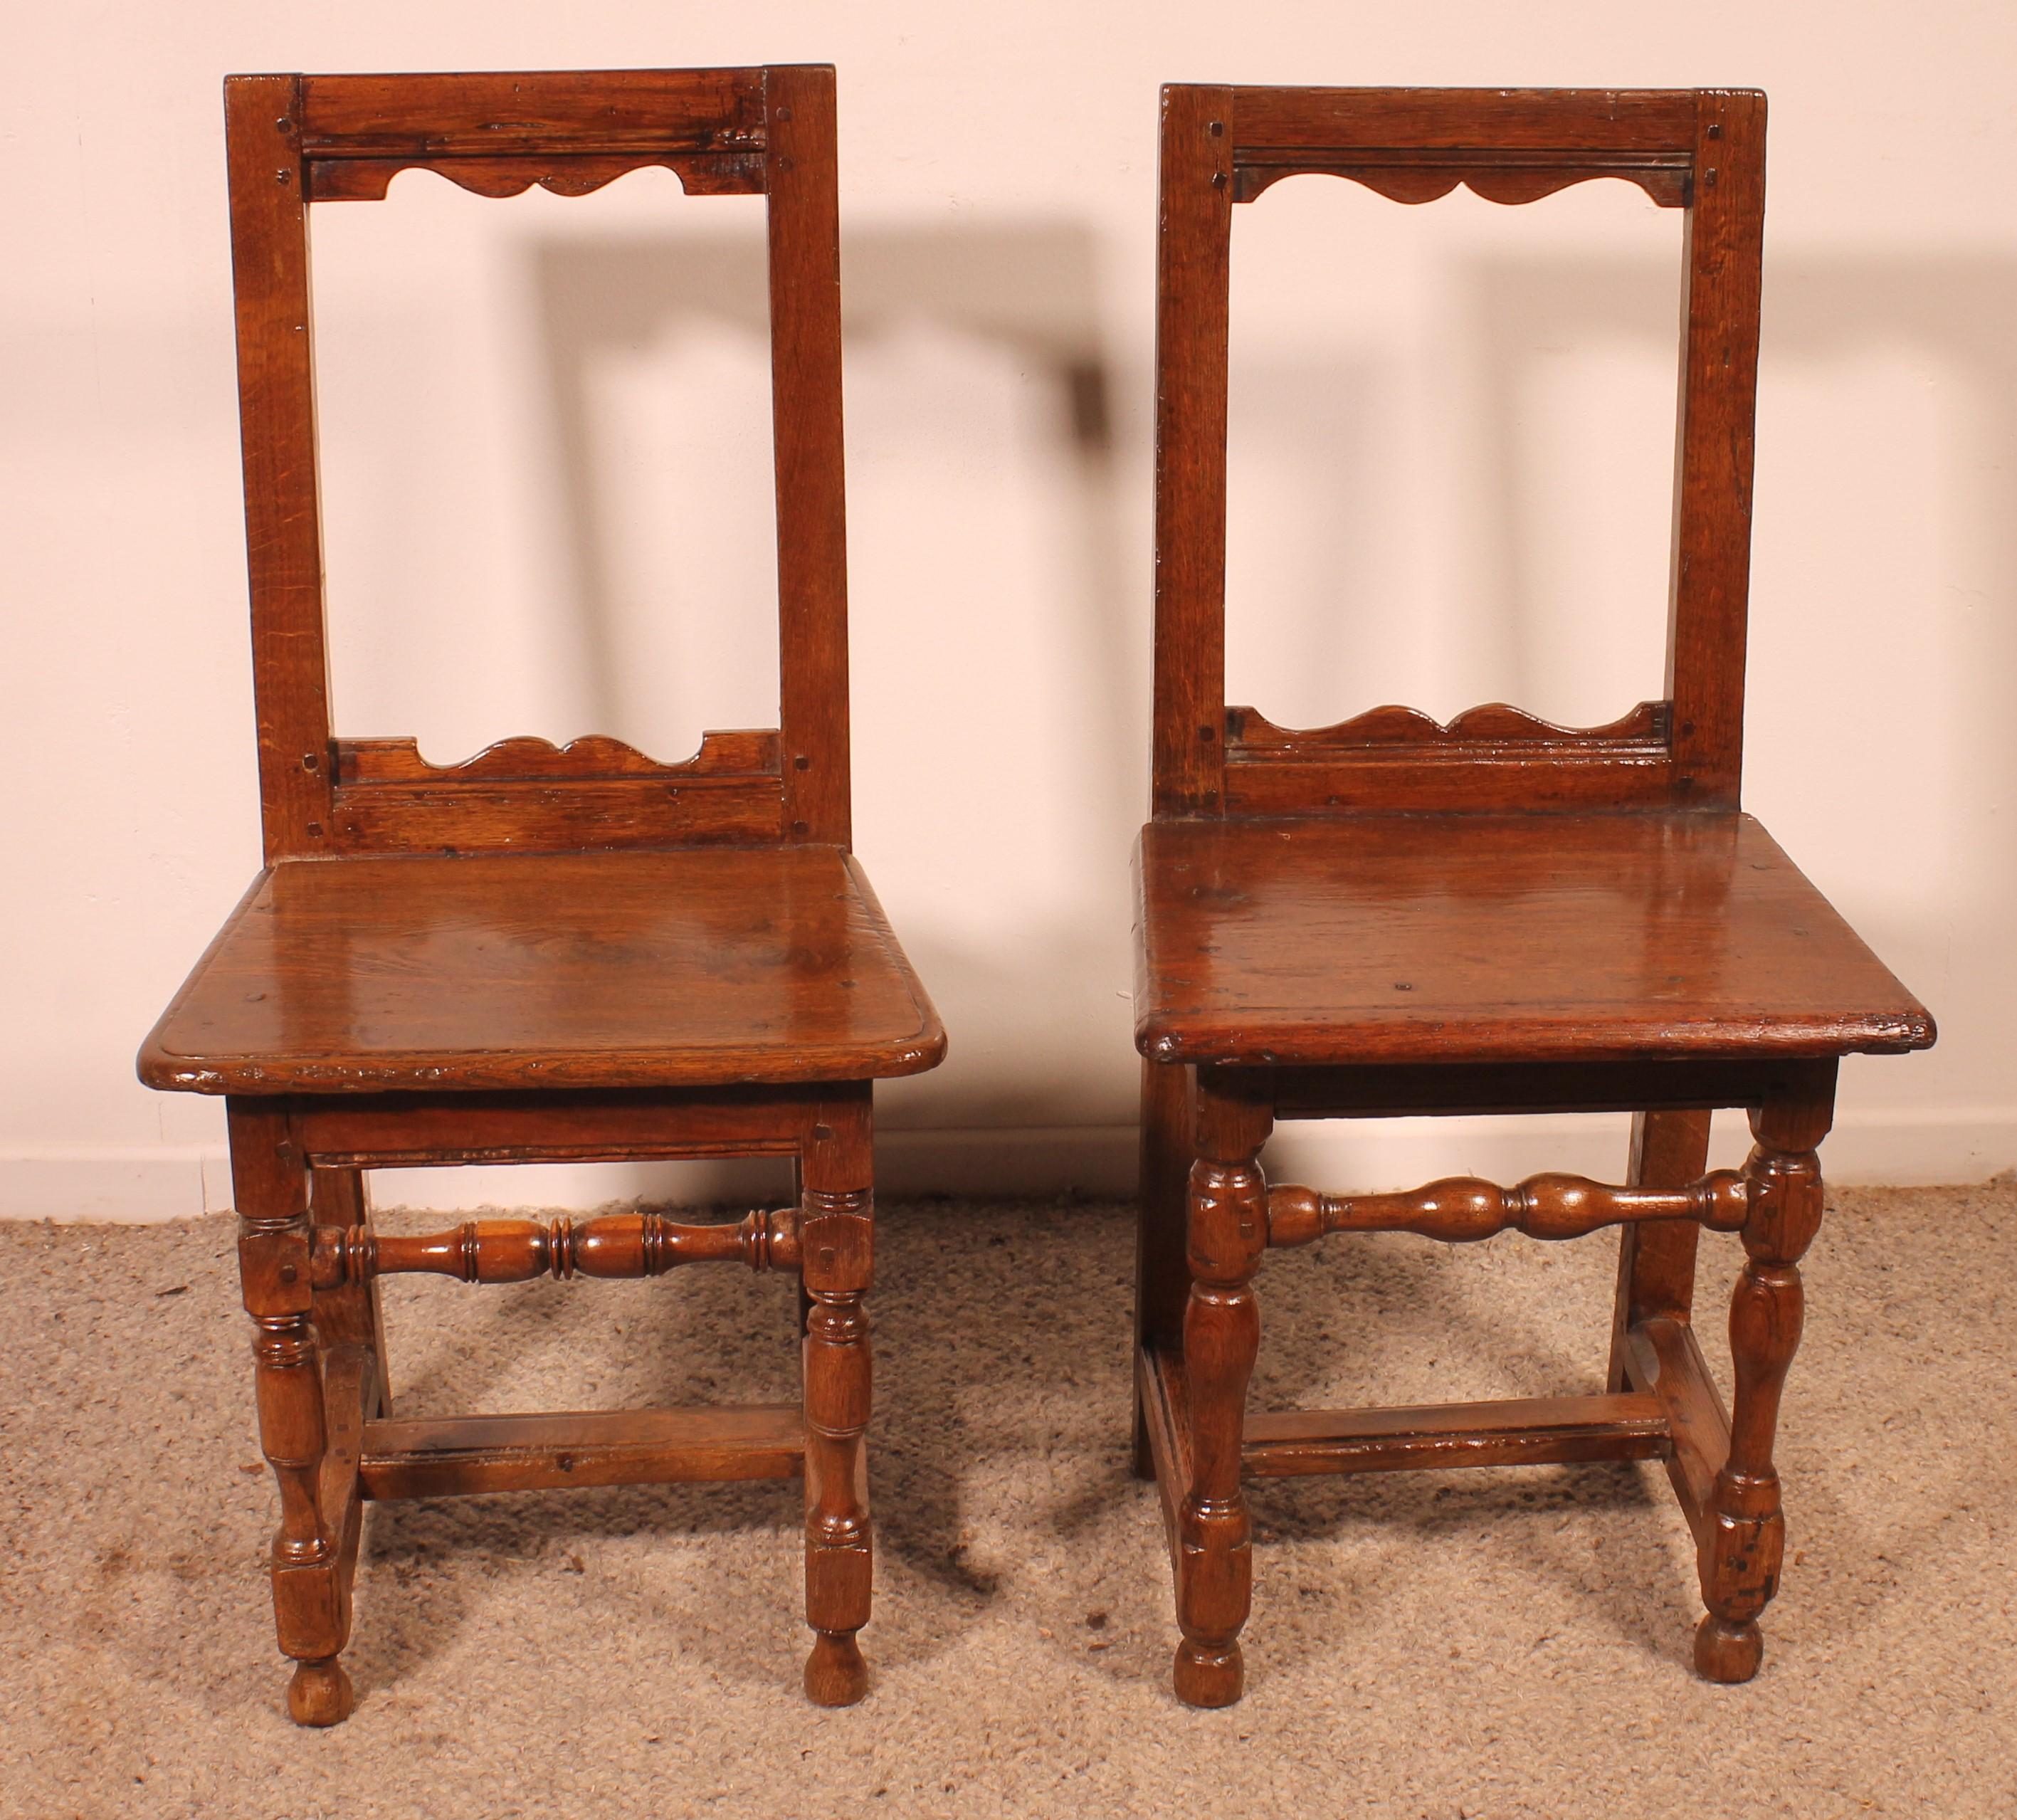 Set Of 4 Lorraine Chairs From The 18th Century In Oak For Sale 3